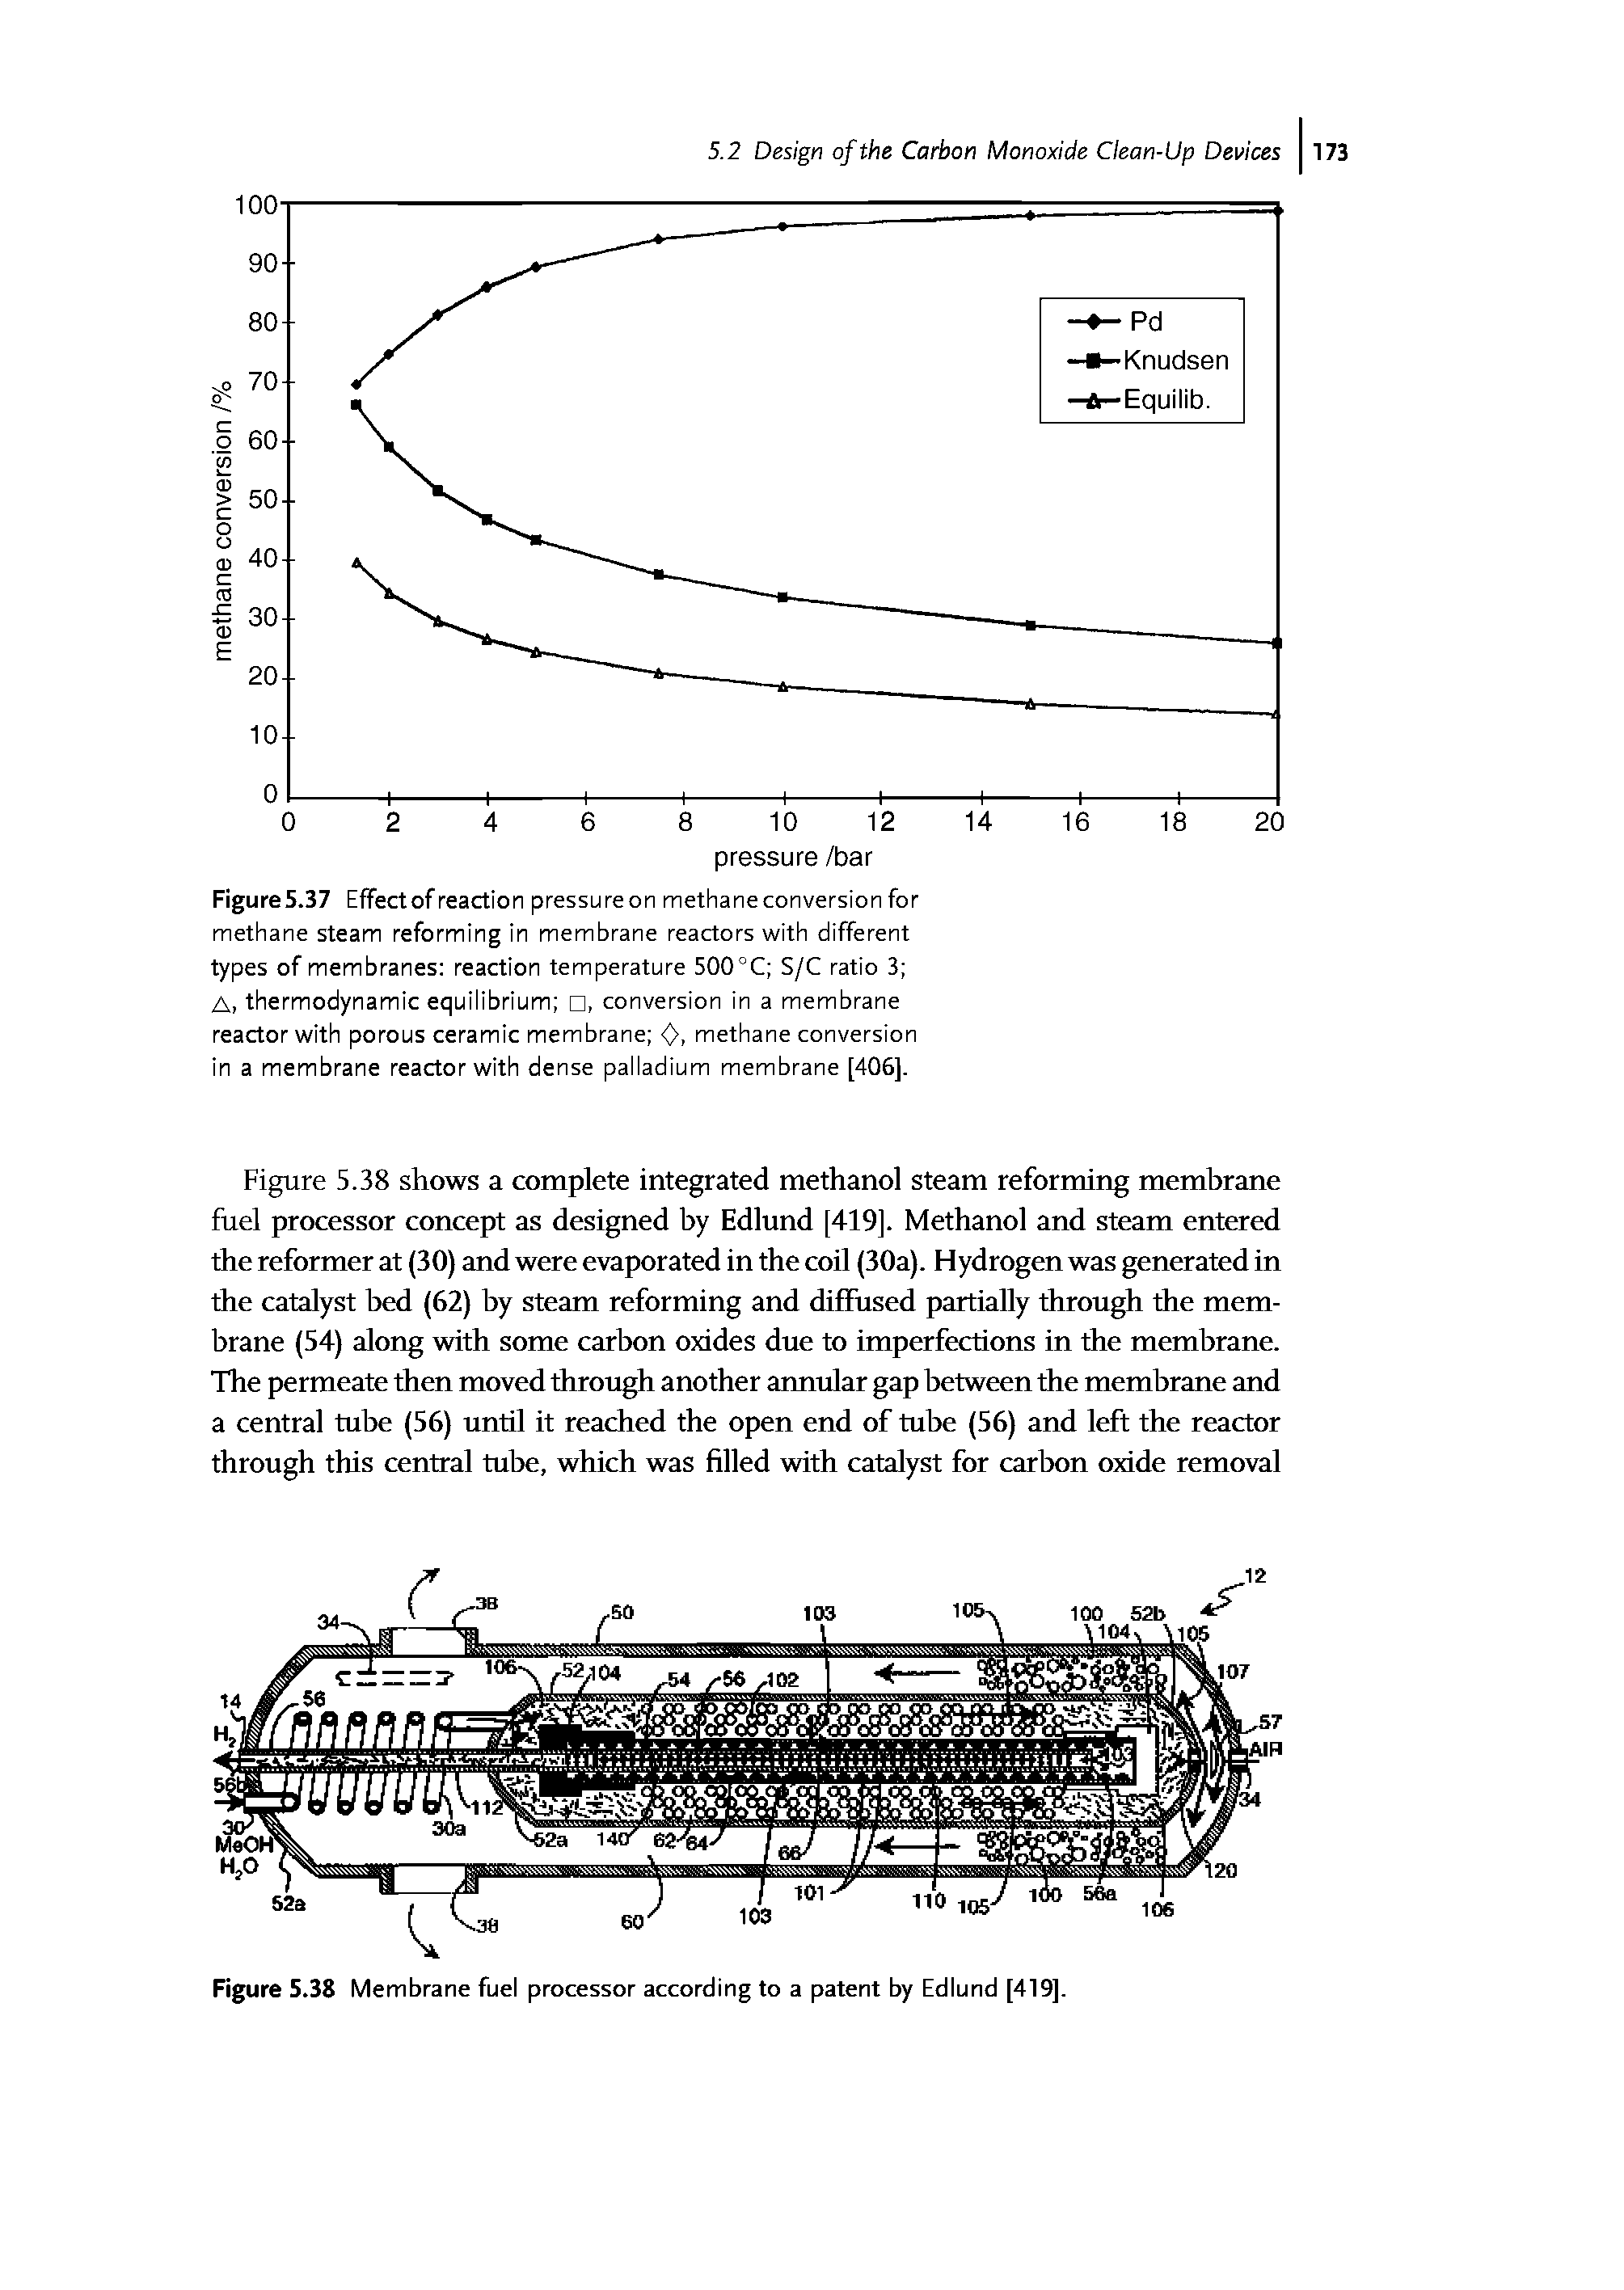 Figure 5.37 Effect of reaction pressureon methane conversion for methane steam reforming in membrane reactors with different types of membranes reaction temperature 500°C S/C ratio 3 A, thermodynamic equilibrium , conversion in a membrane reactor with porous ceramic membrane 0, methane conversion in a membrane reactor with dense palladium membrane [406].